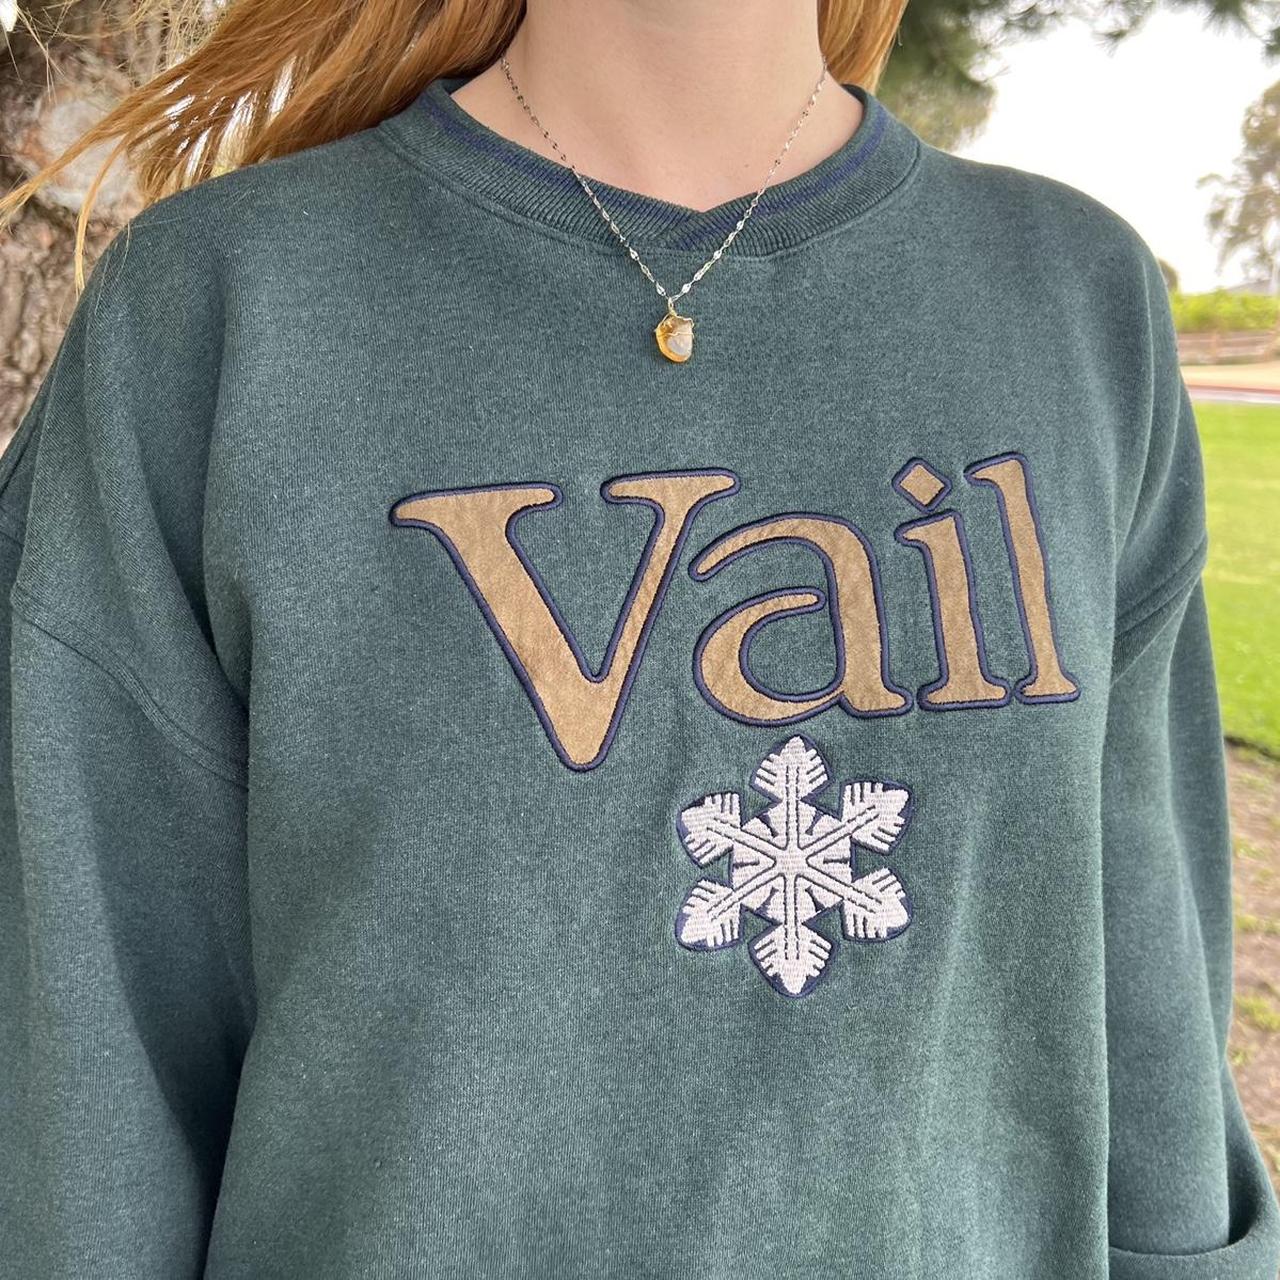 Product Image 1 - Vtg Vail embroidery crewneck 90s